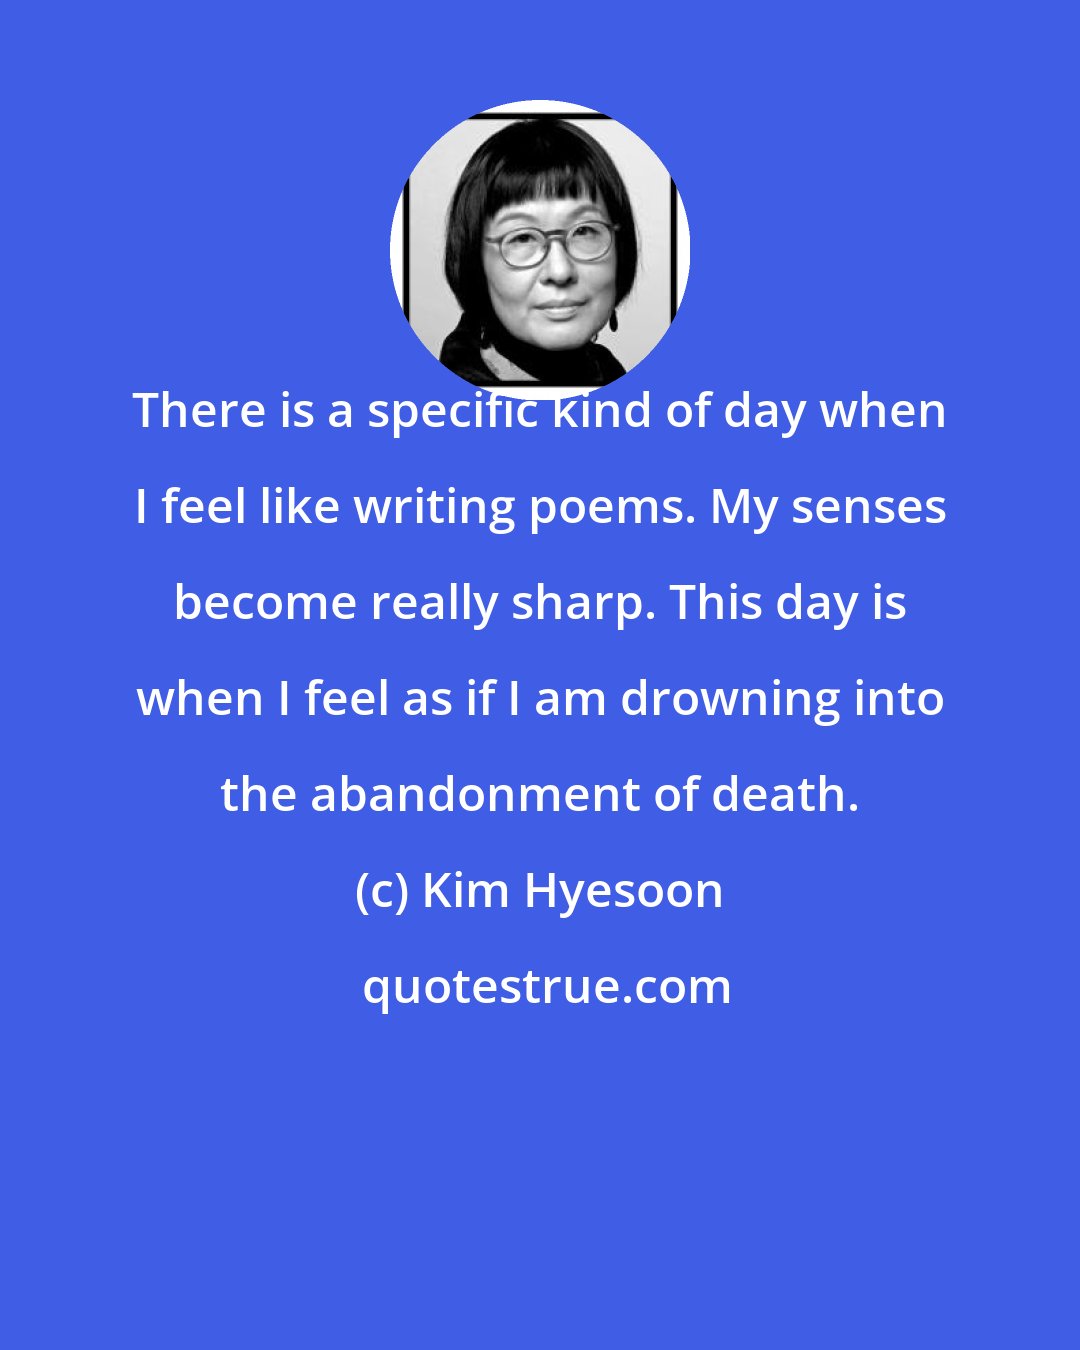 Kim Hyesoon: There is a specific kind of day when I feel like writing poems. My senses become really sharp. This day is when I feel as if I am drowning into the abandonment of death.